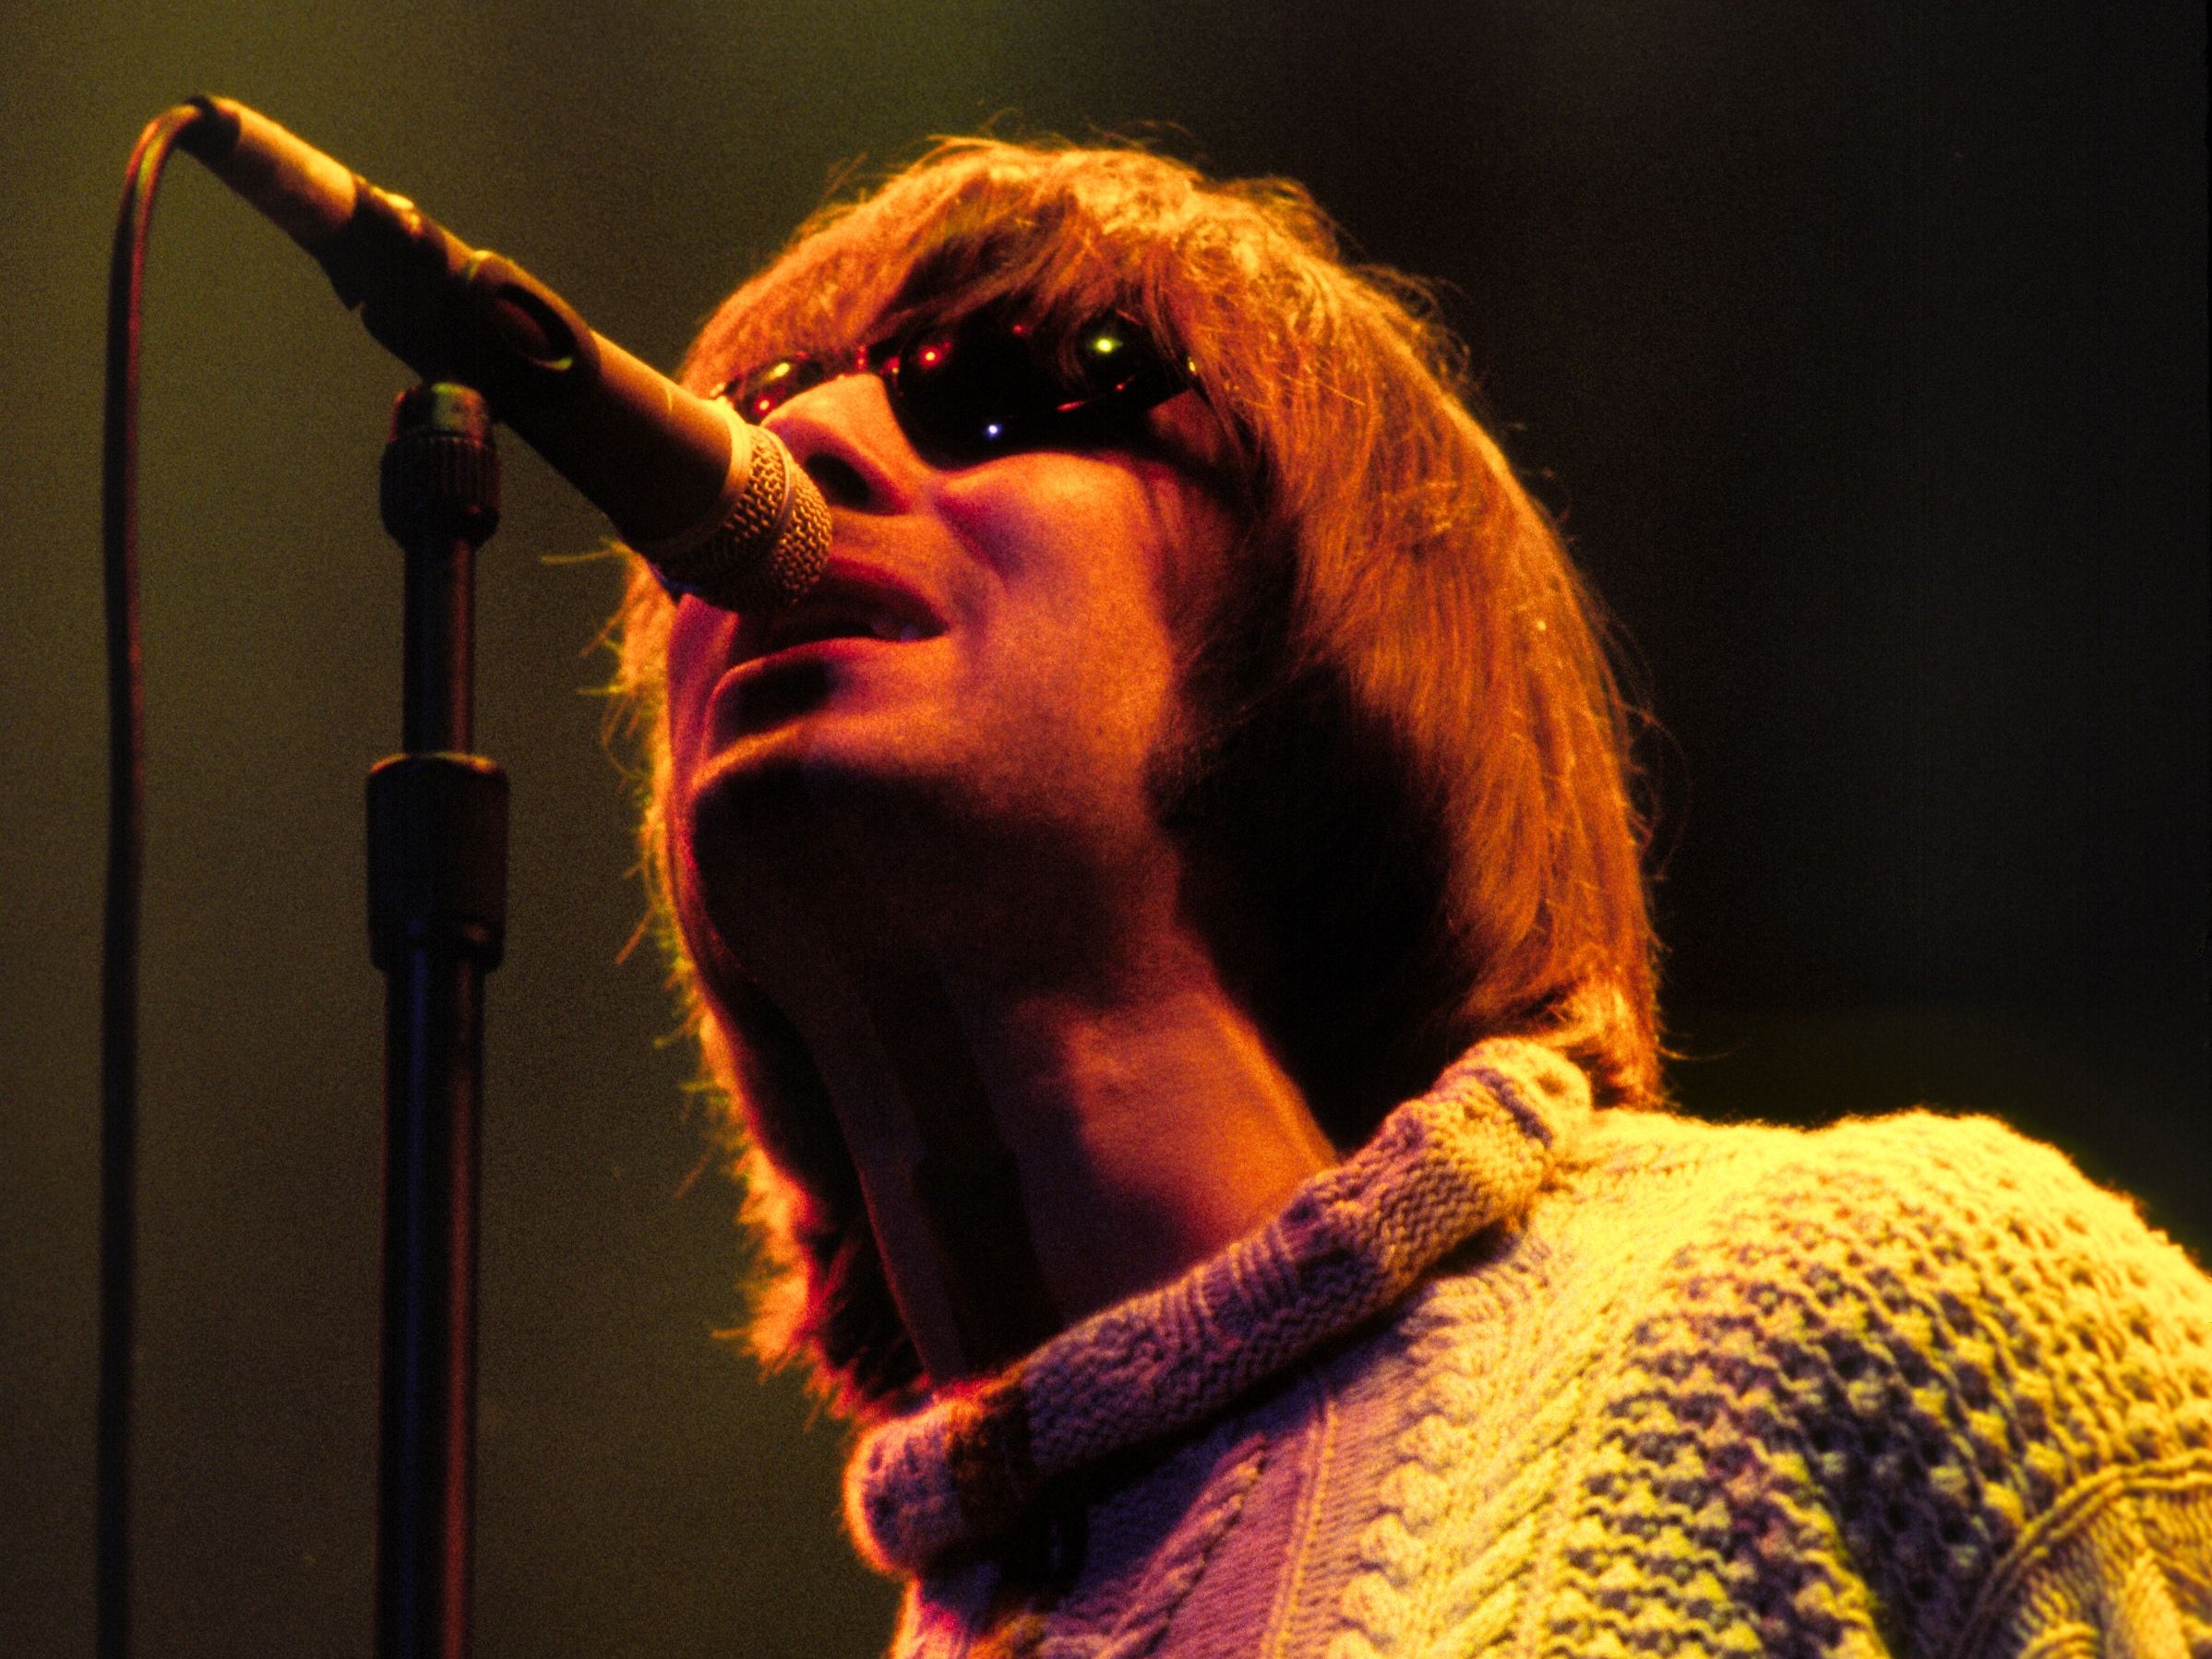 Liam Gallagher performs with Oasis at Knebworth